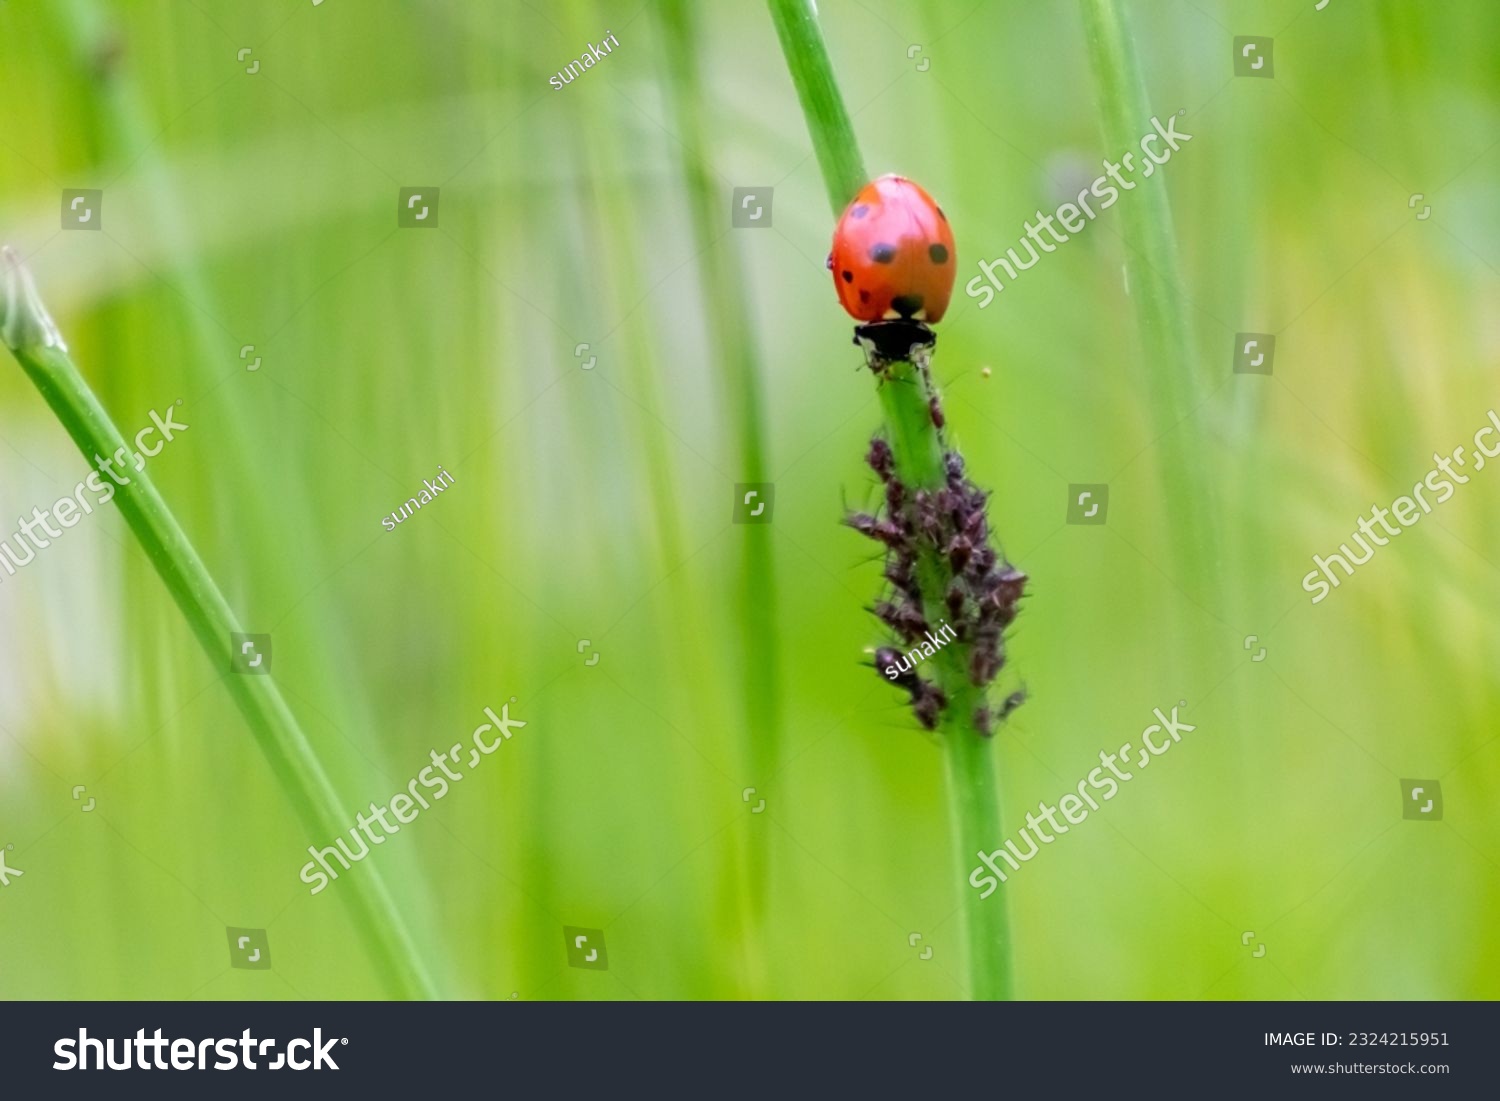 Beneficial insect ladybug red wings and black dotted hunting for plant louses as biological pest control and natural insecticide for organic farming with natural enemies reduces agriculture pesticides #2324215951